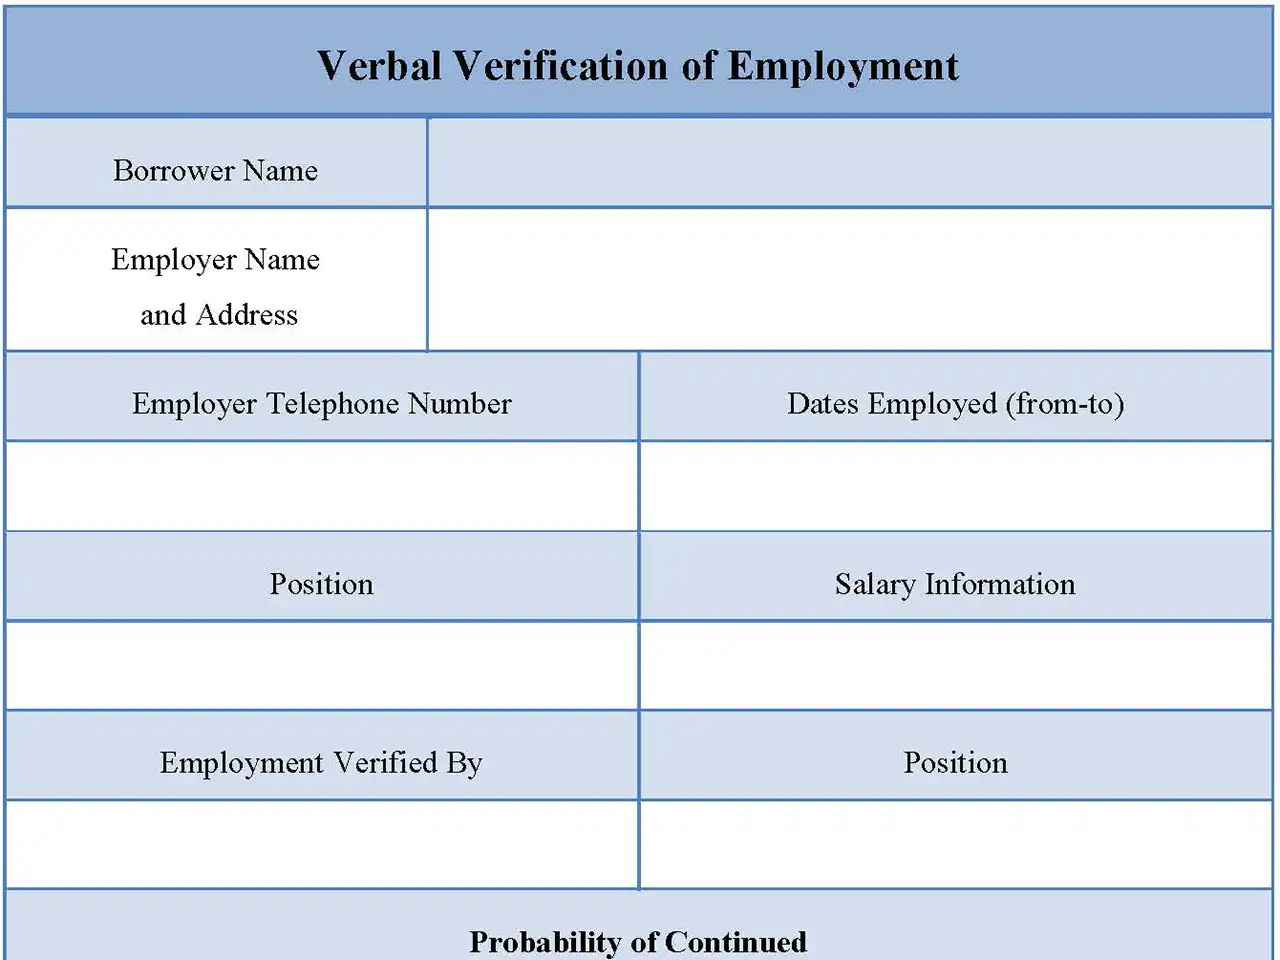 Verbal Verification of Employment Fillable PDF Form